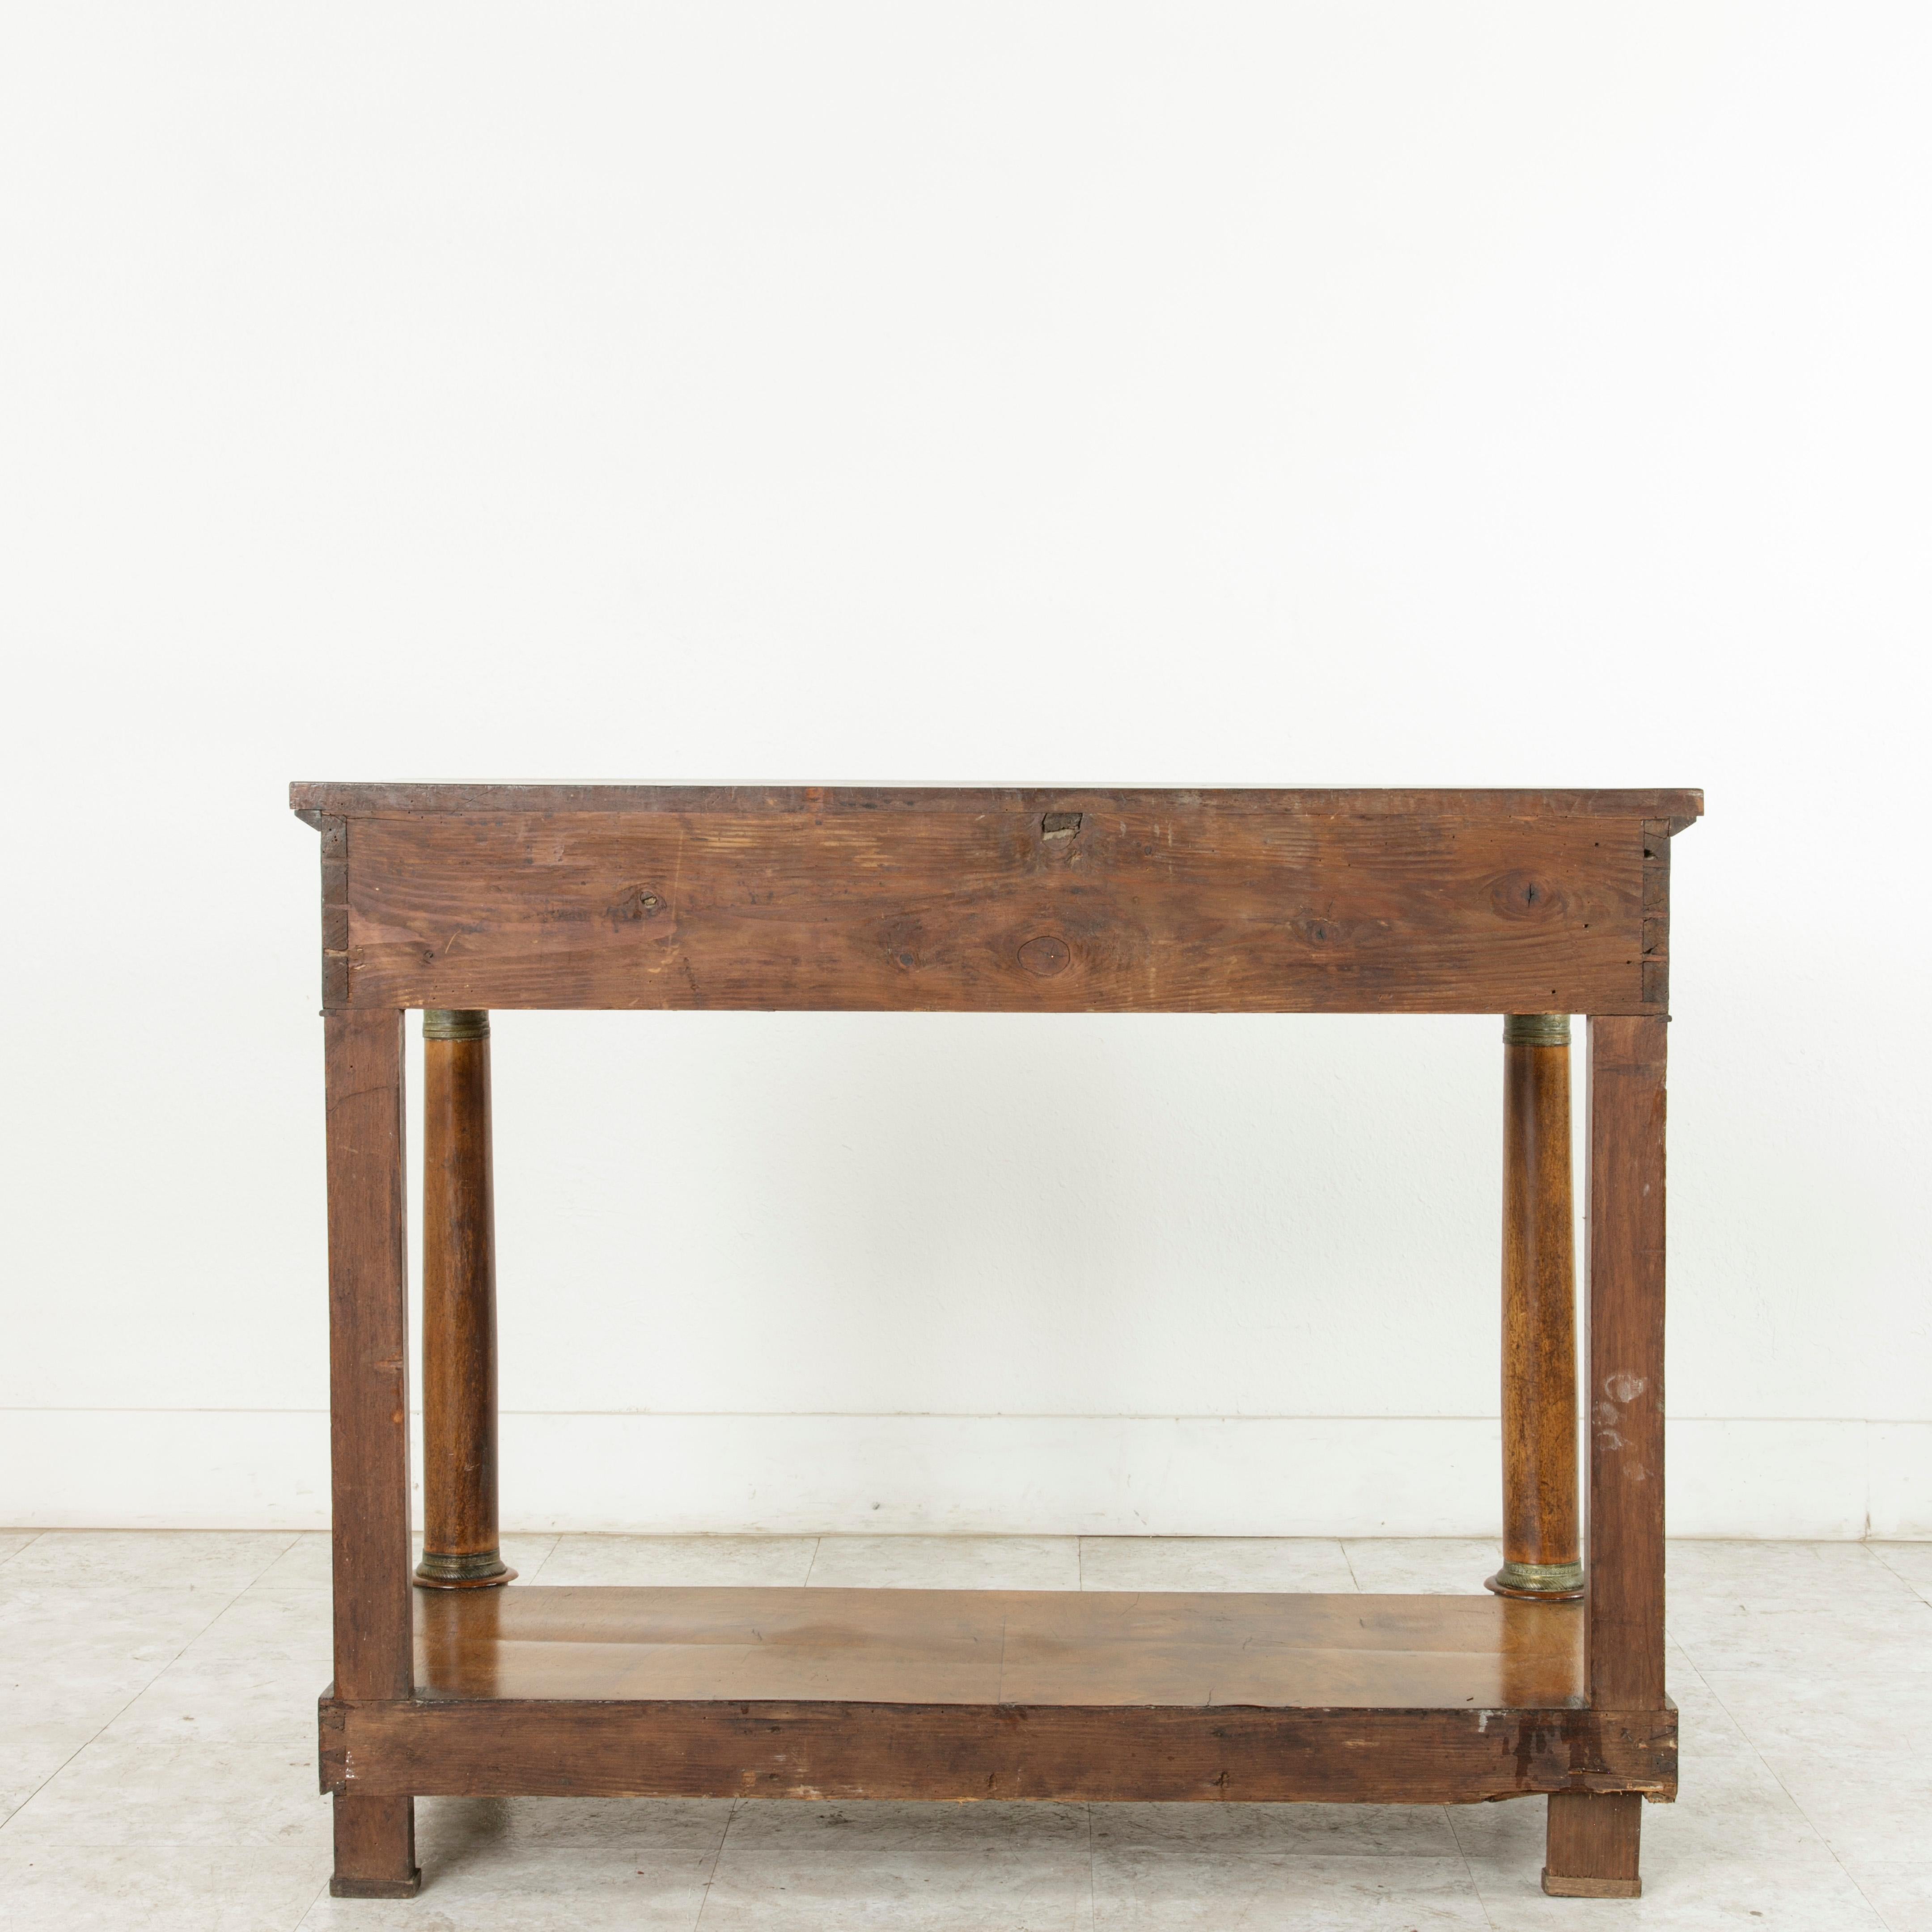 Early 19th Century, French Empire Period Burl Walnut Console Table with Drawer 3